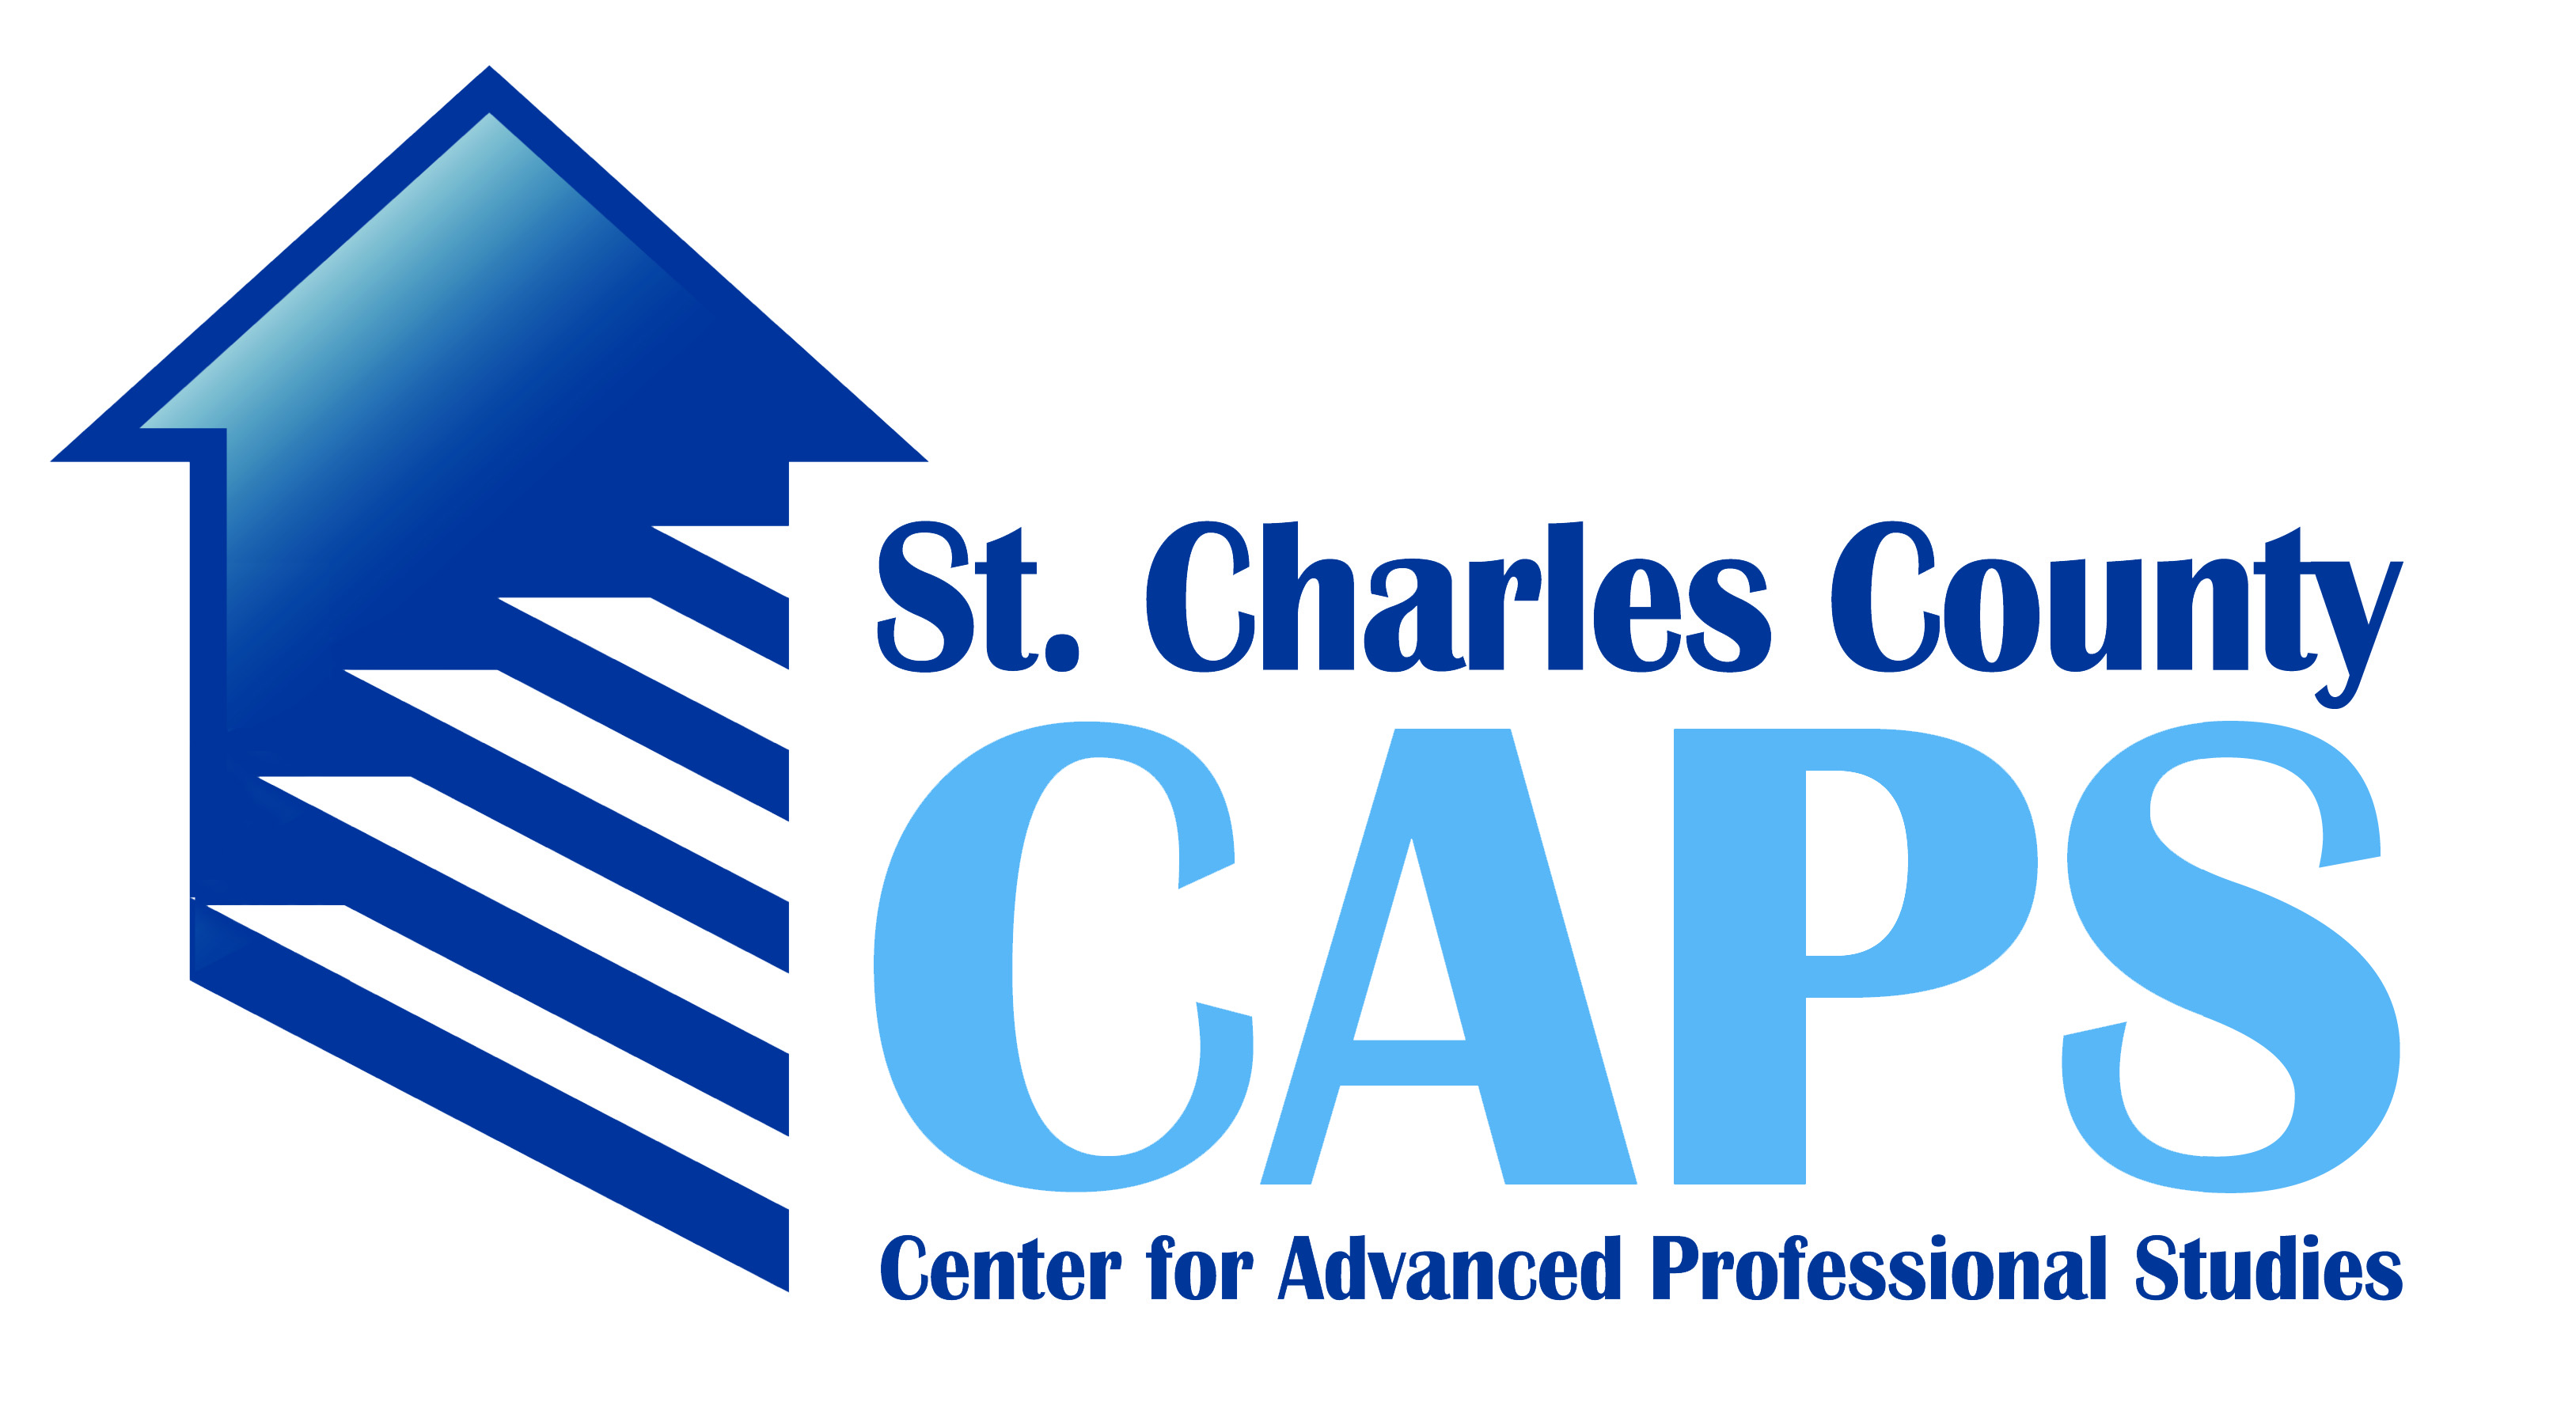 Centers for Advanced Professional Studies logo